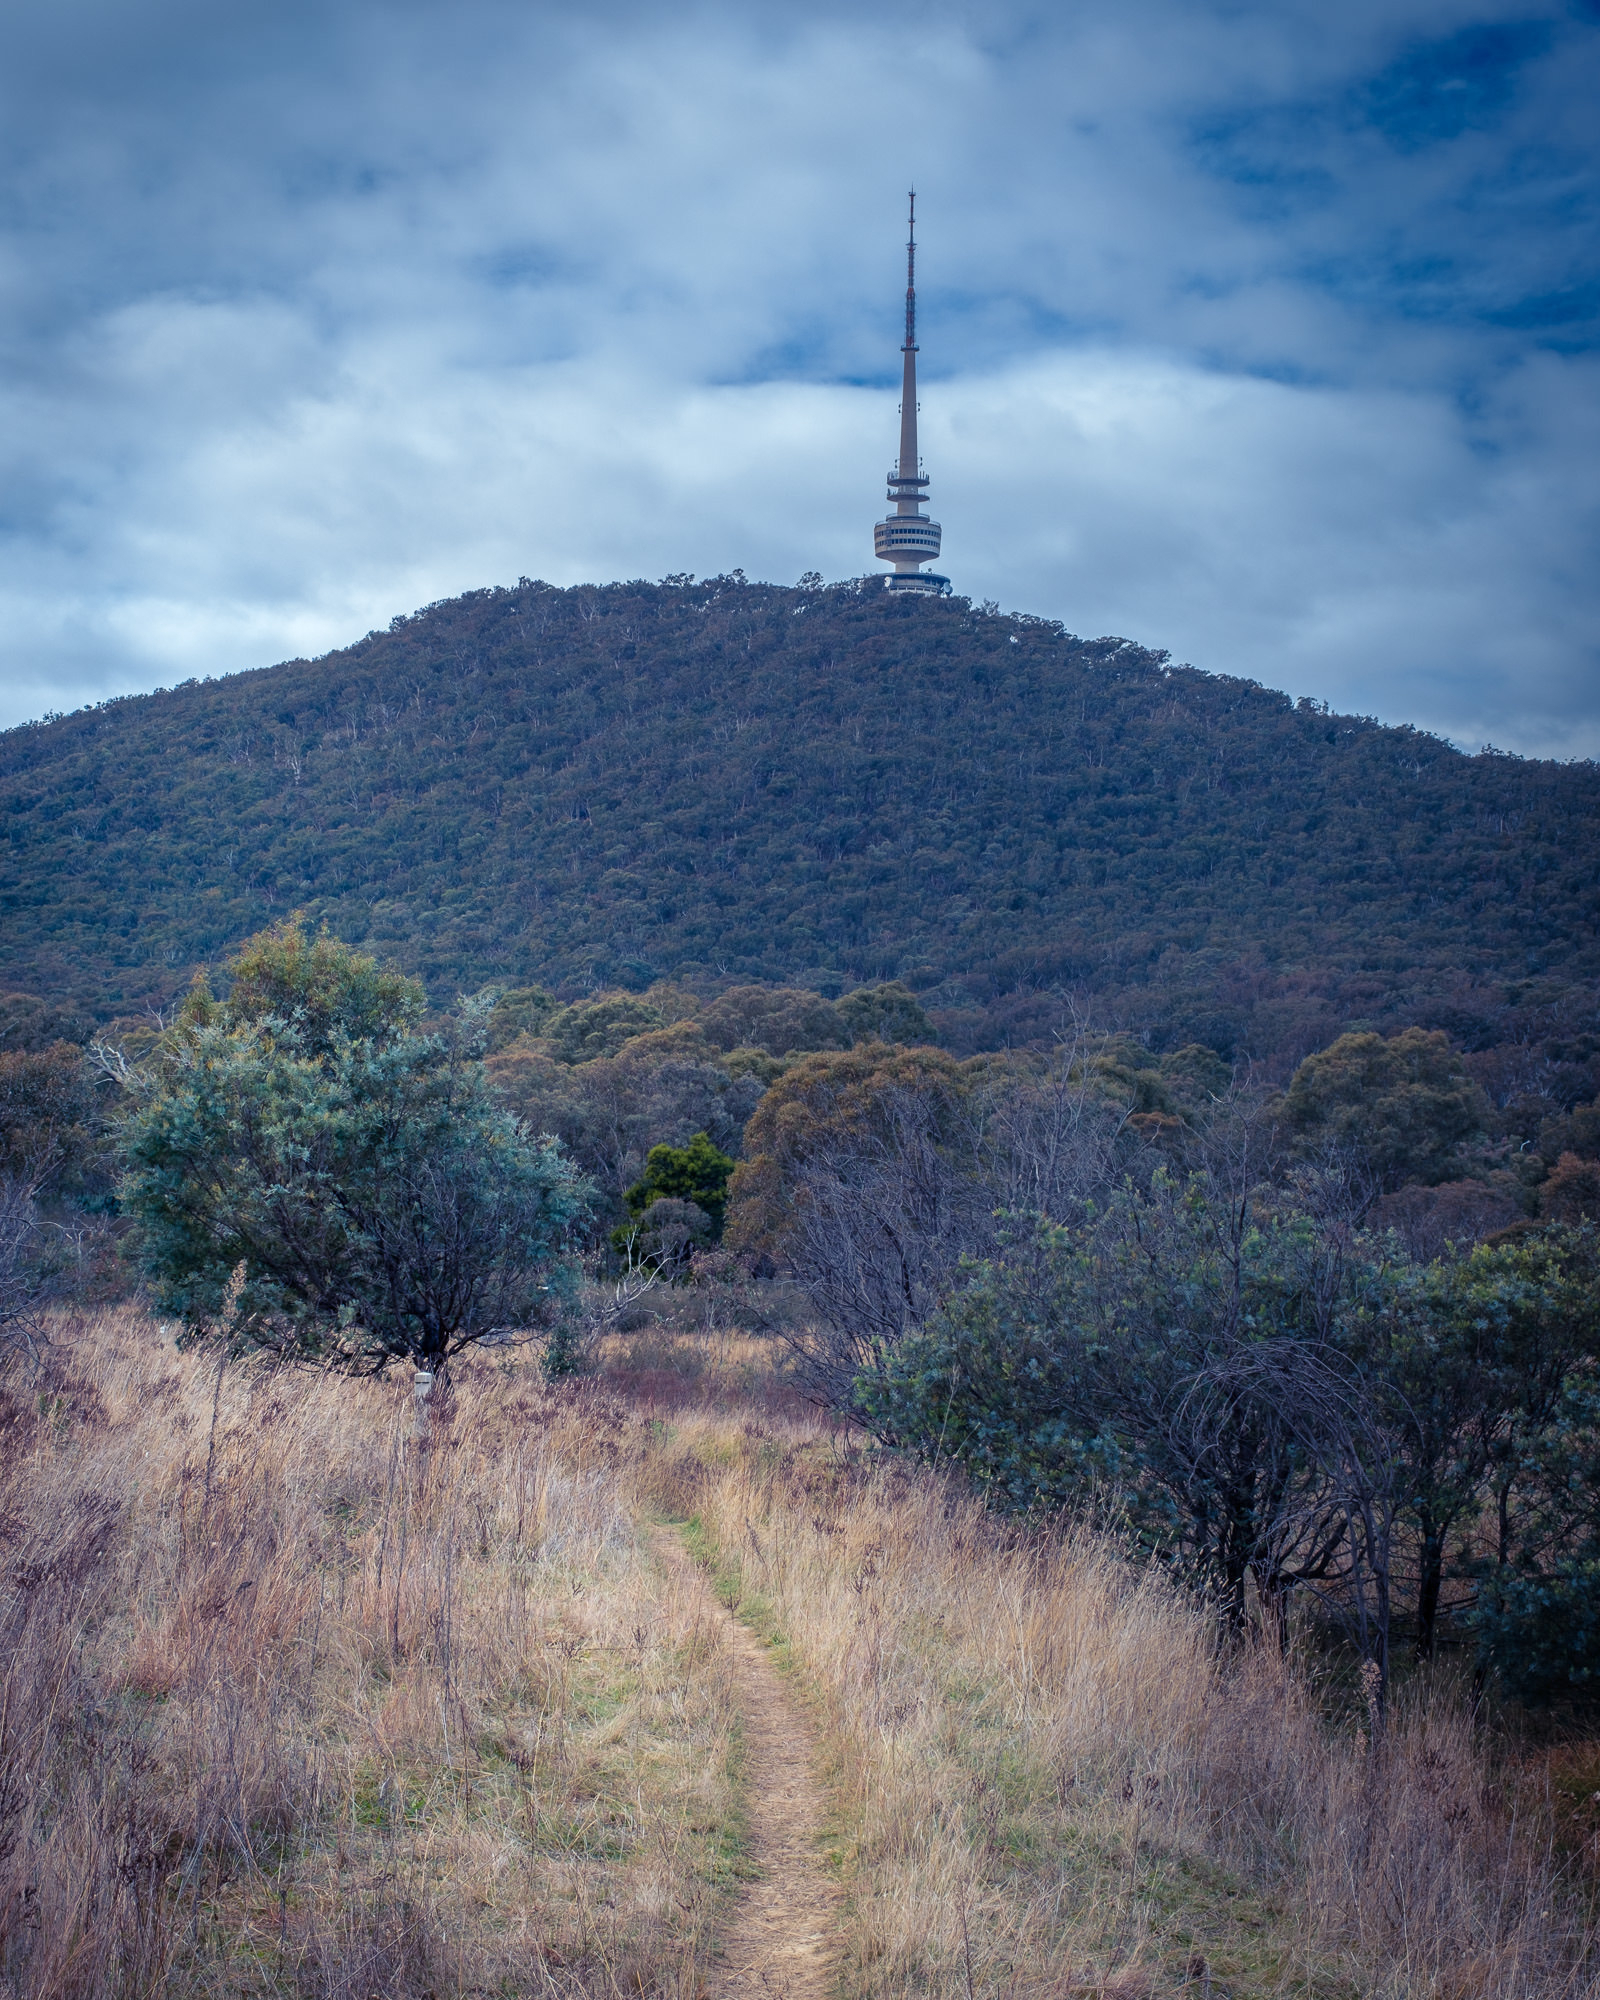 Bushland setting in Aranda Bushland, near Canberra’s CBD. Black Mountain, with the distincitve Telstra Tower is a prominent background feature.